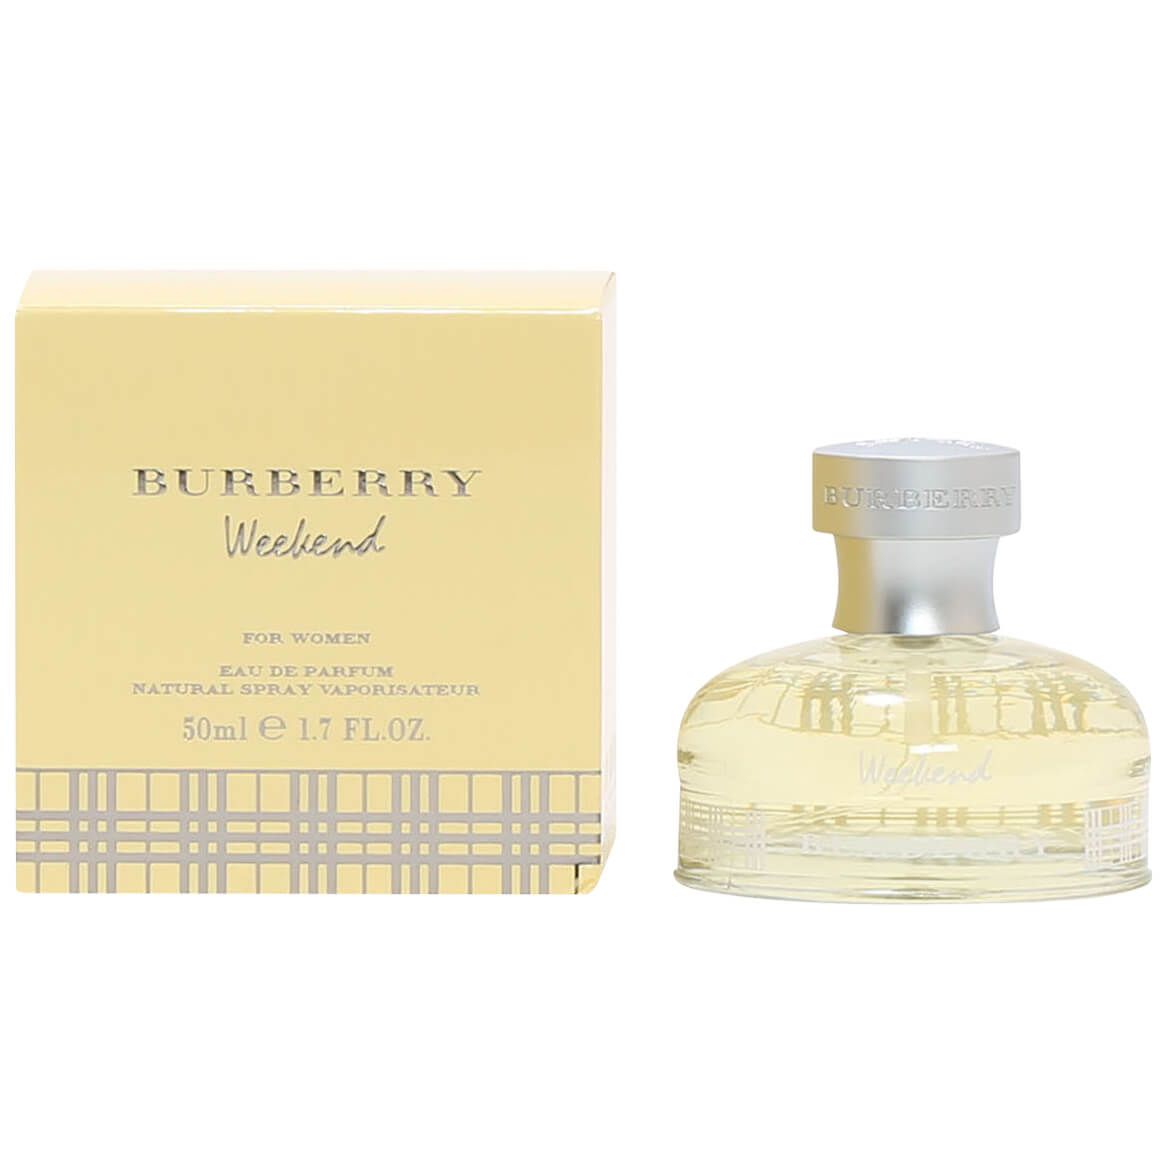 Burberry Weekend for Women EDP, 1.7 oz. + '-' + 373074